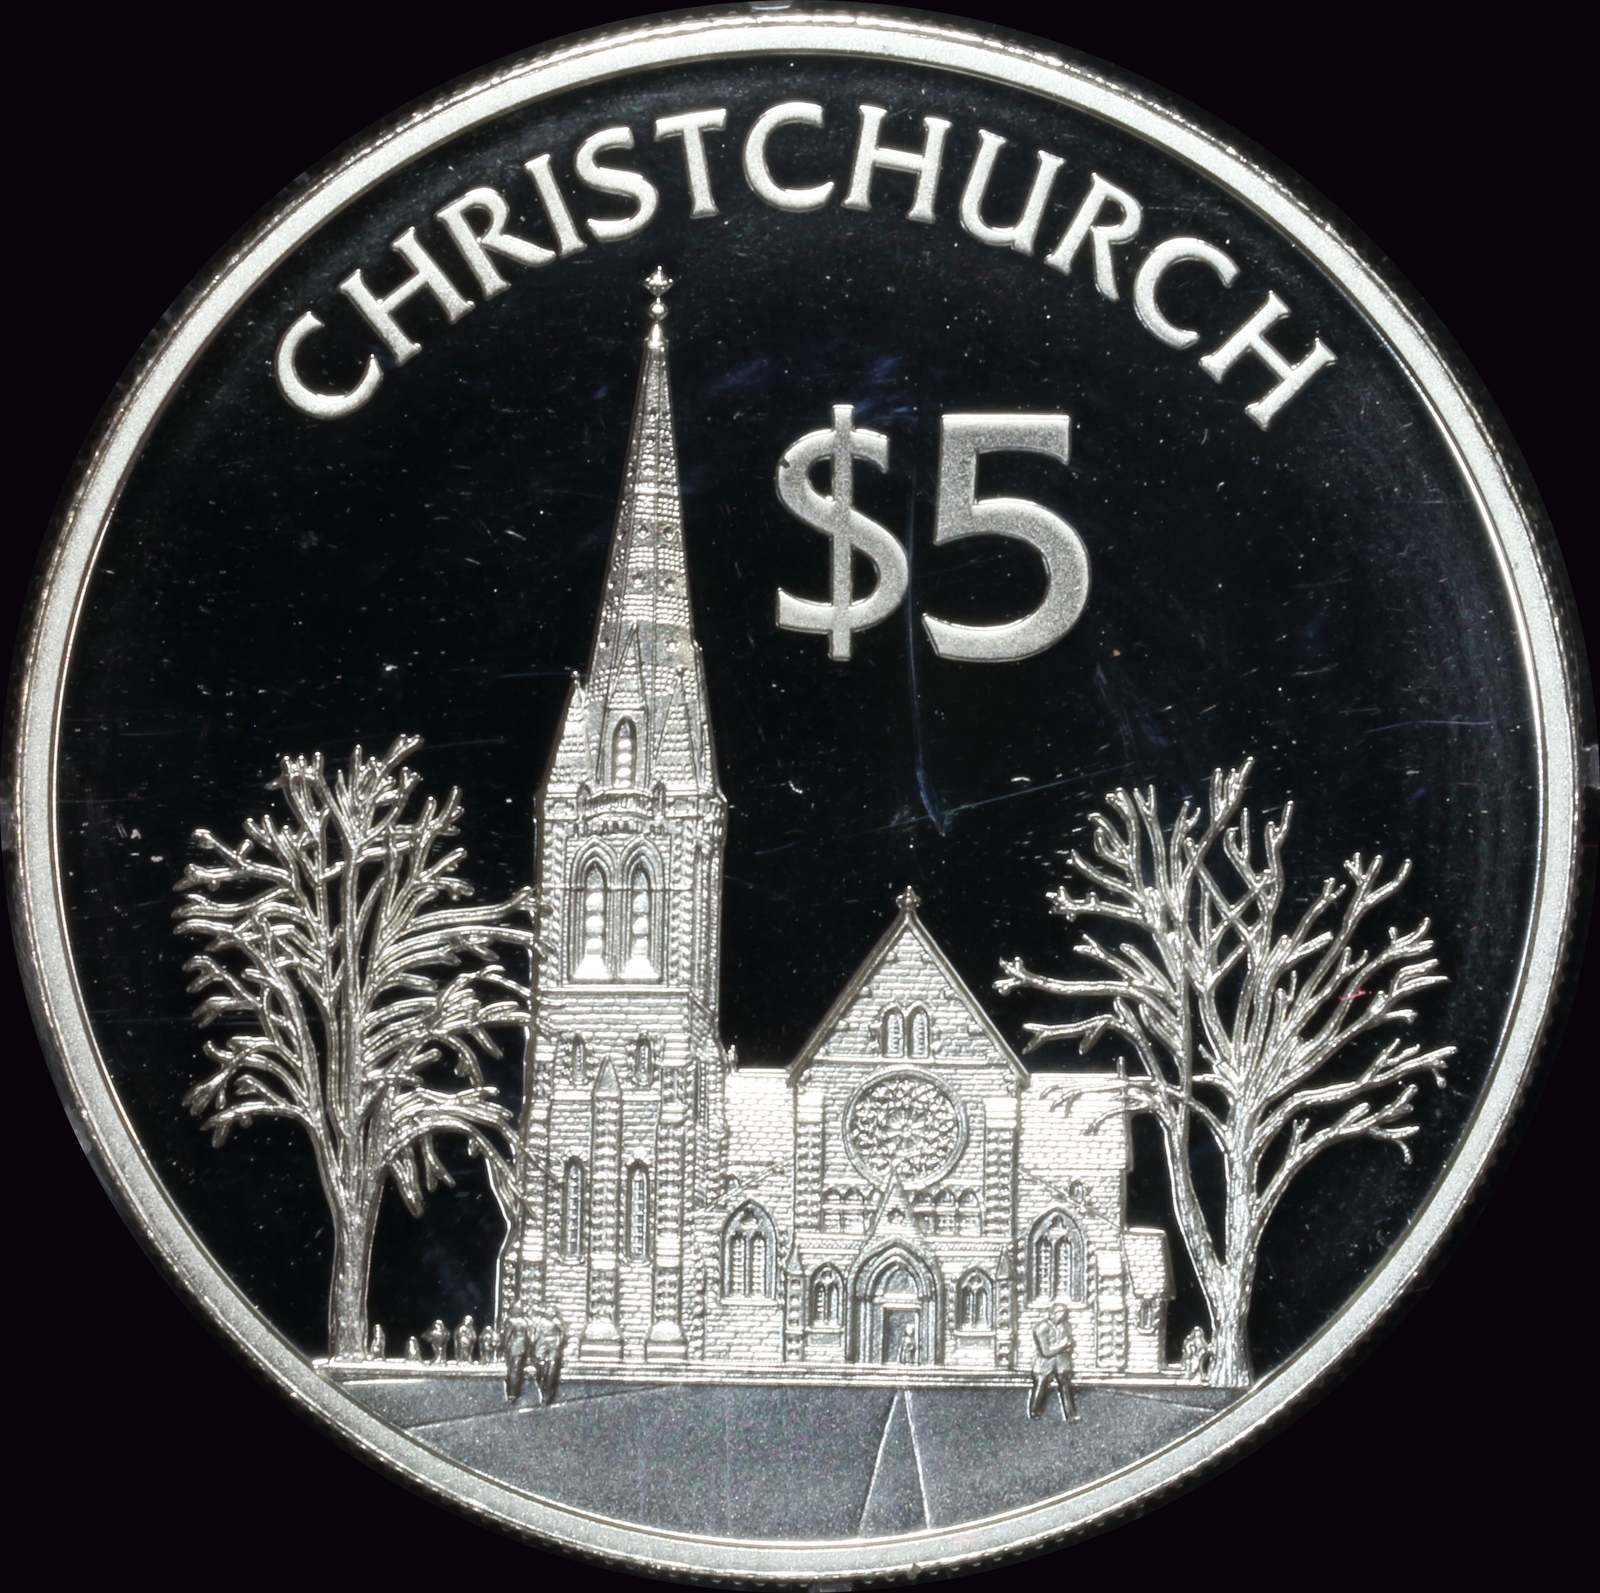 New Zealand 1997 Silver $5 Proof Christchurch Garden City product image